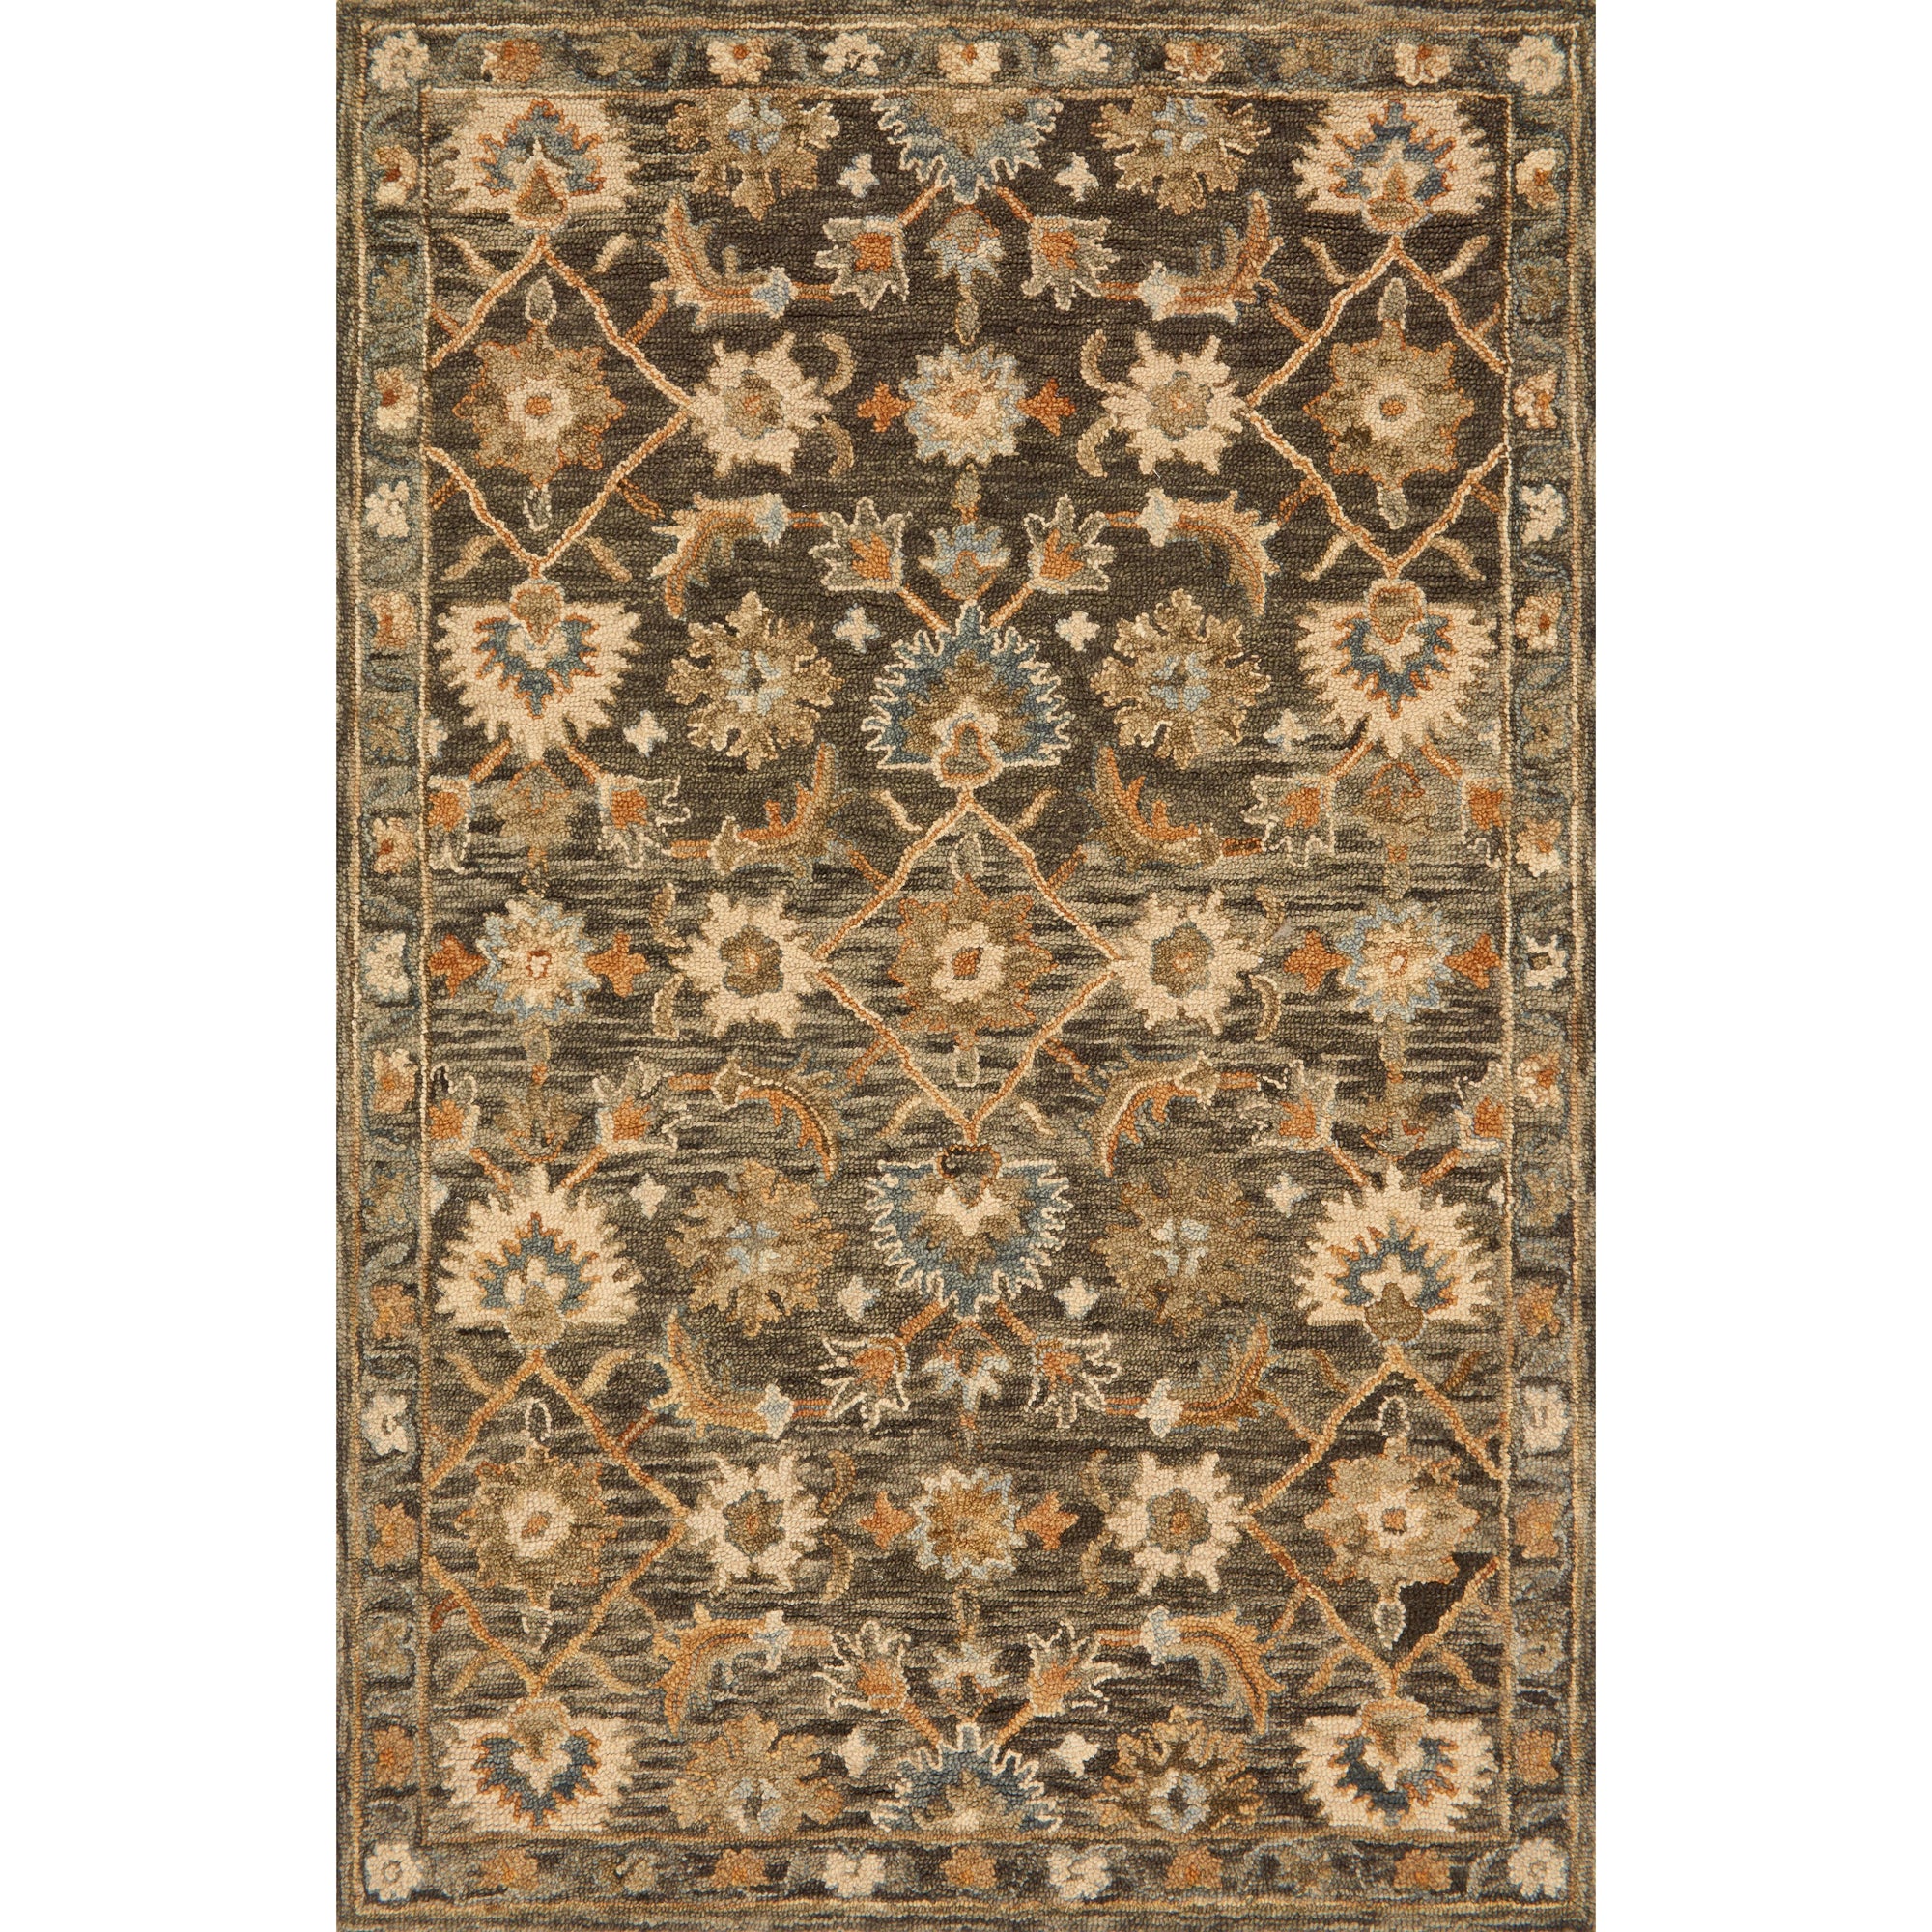 Rugs by Roo Loloi Victoria Dk Taupe Multi Area Rug in size 18" x 18" Sample